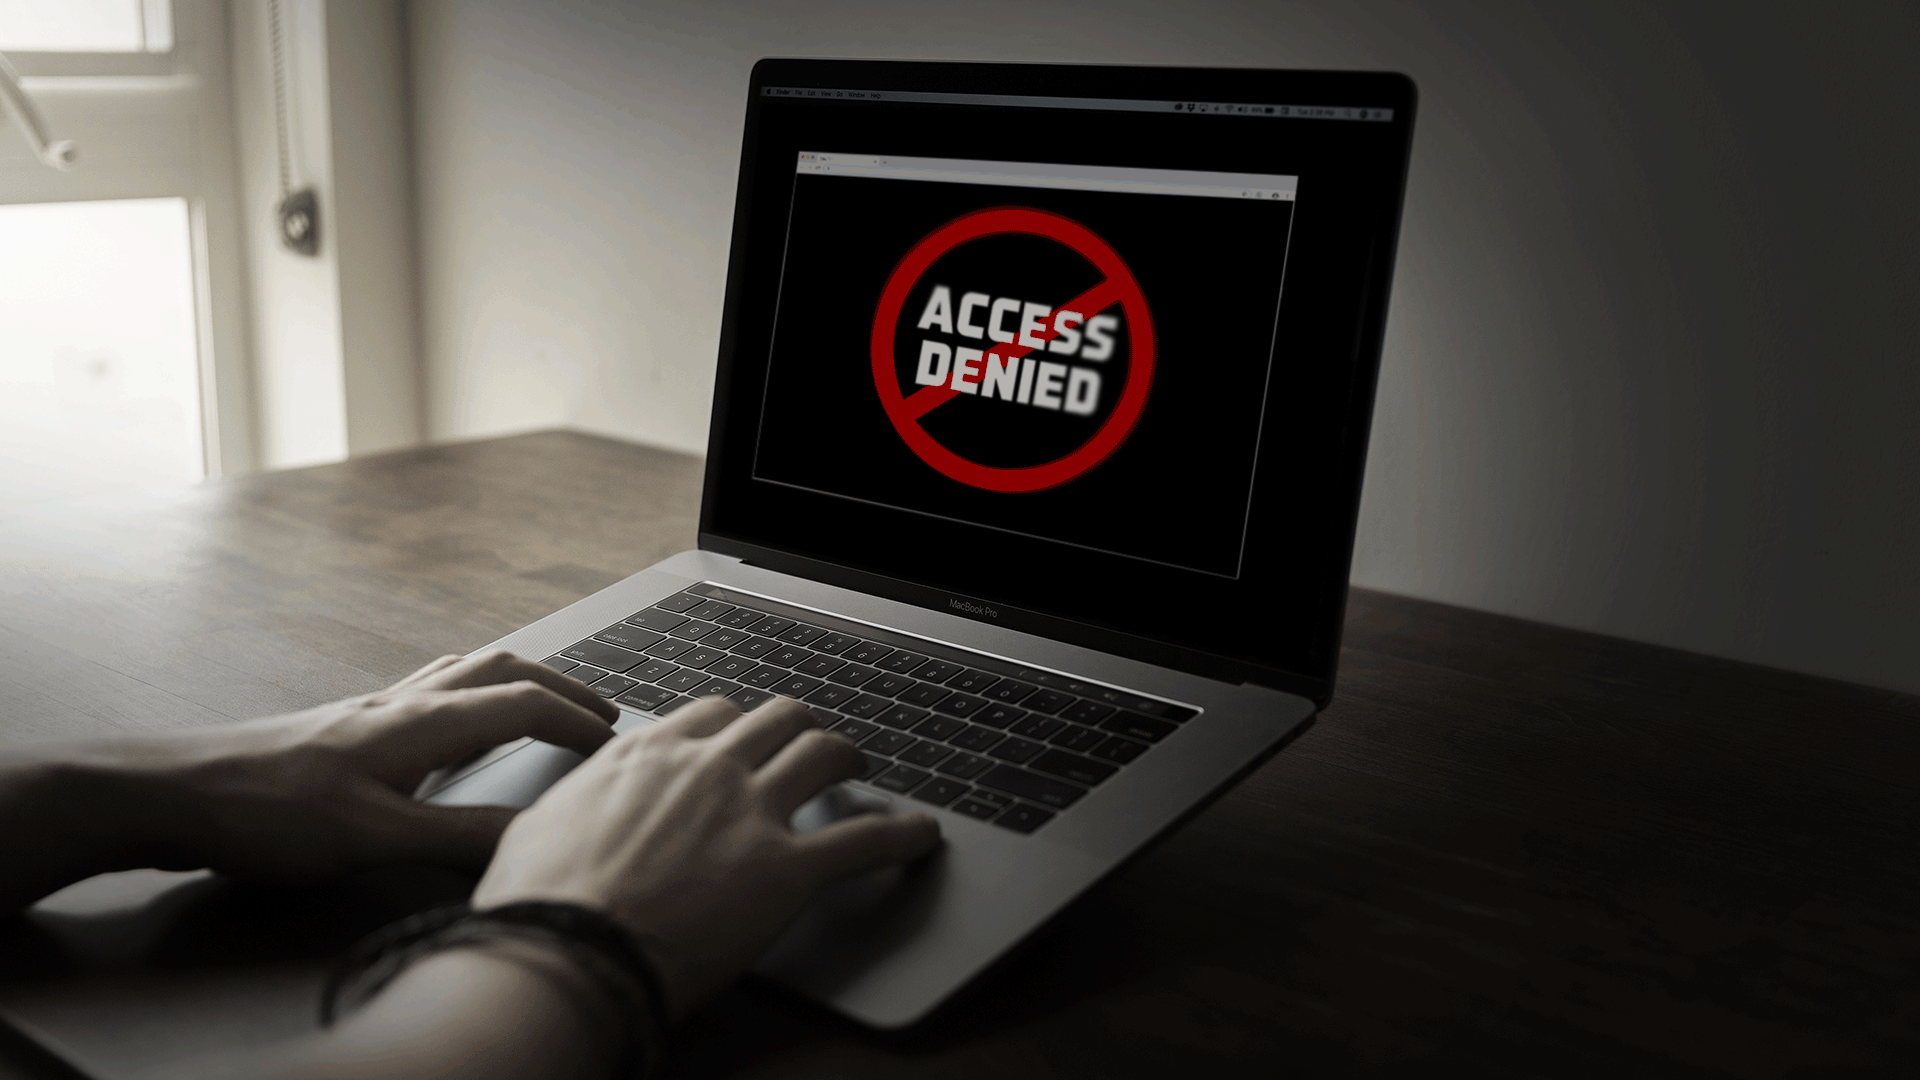 GIF of "Access Denied" message flashing on a laptop screen as hands type